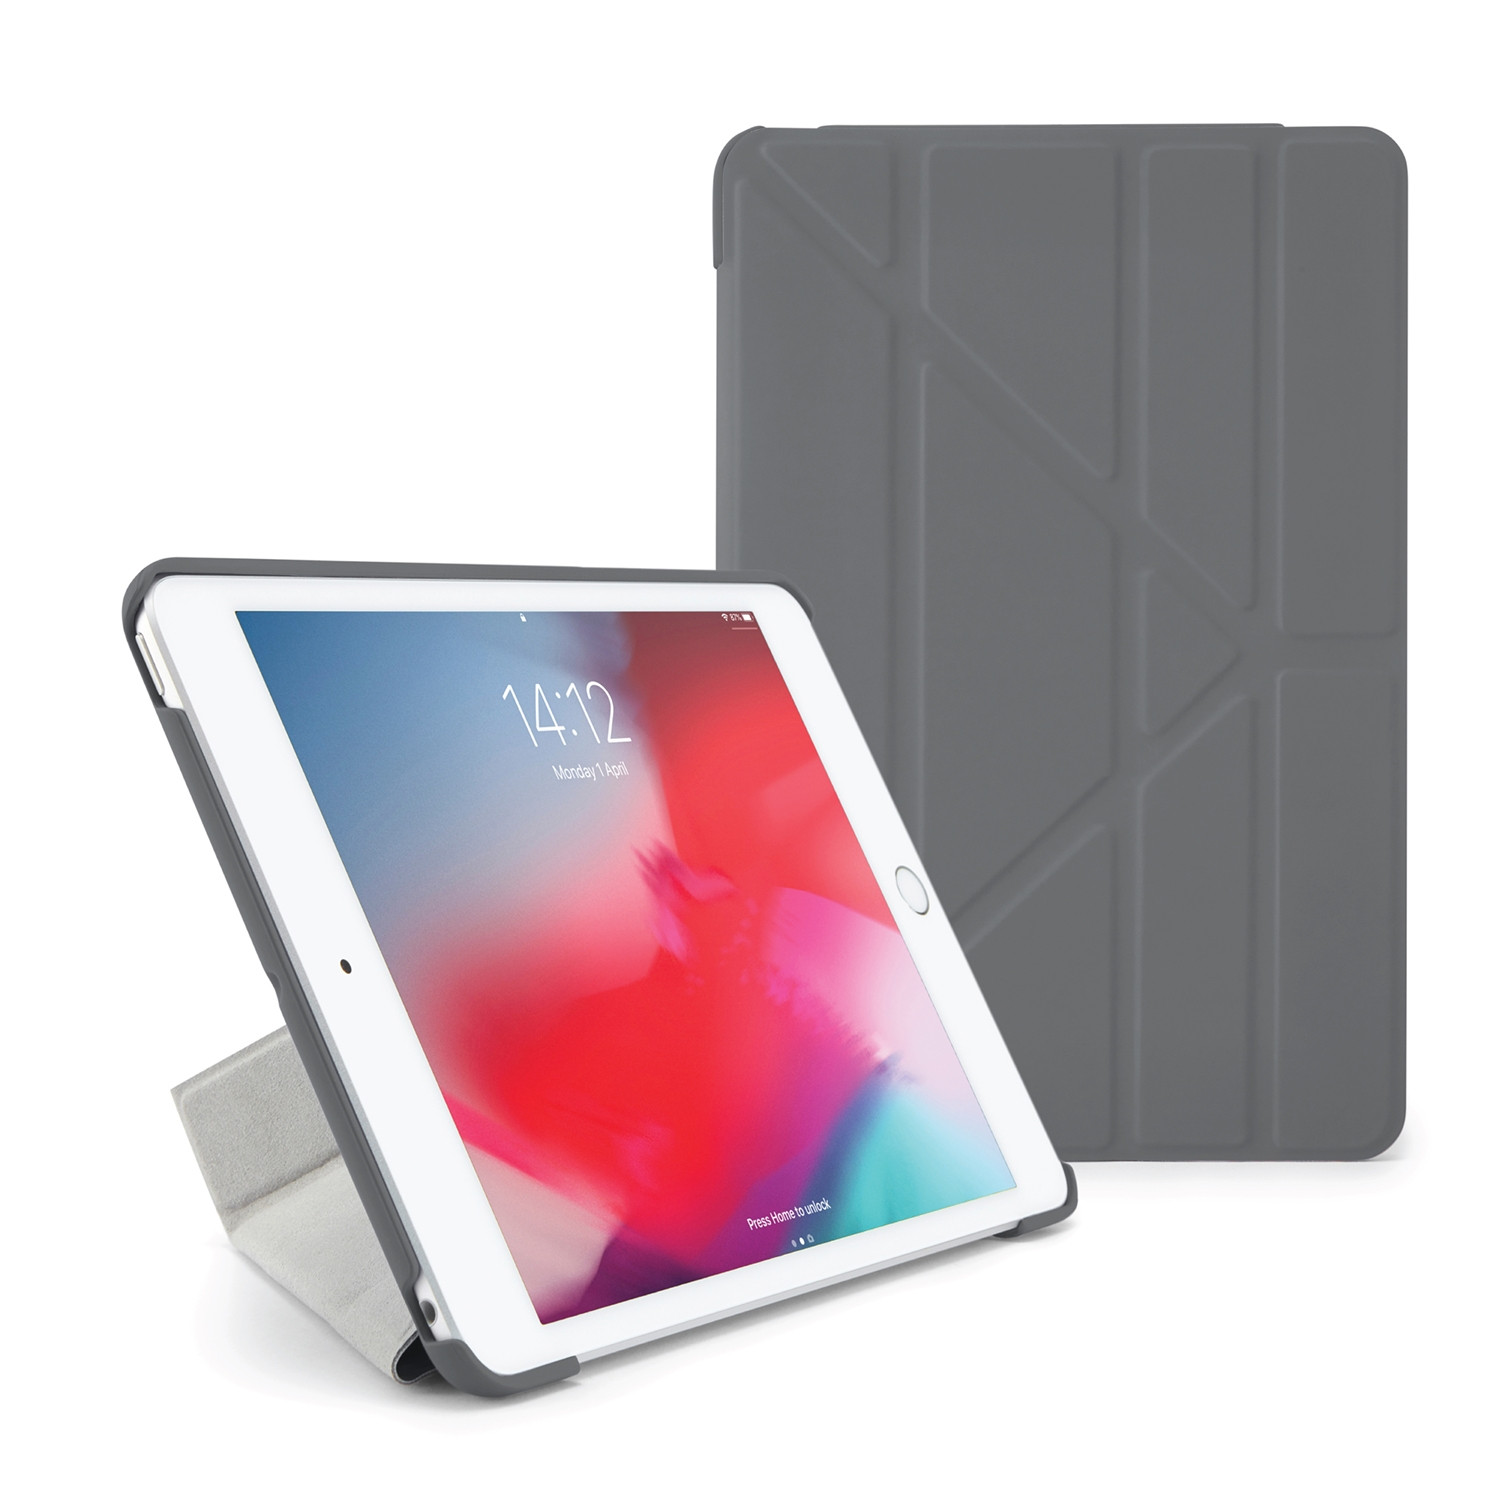 UltraGrip: Secure and Comfortable Case for Your iPad Mini Case